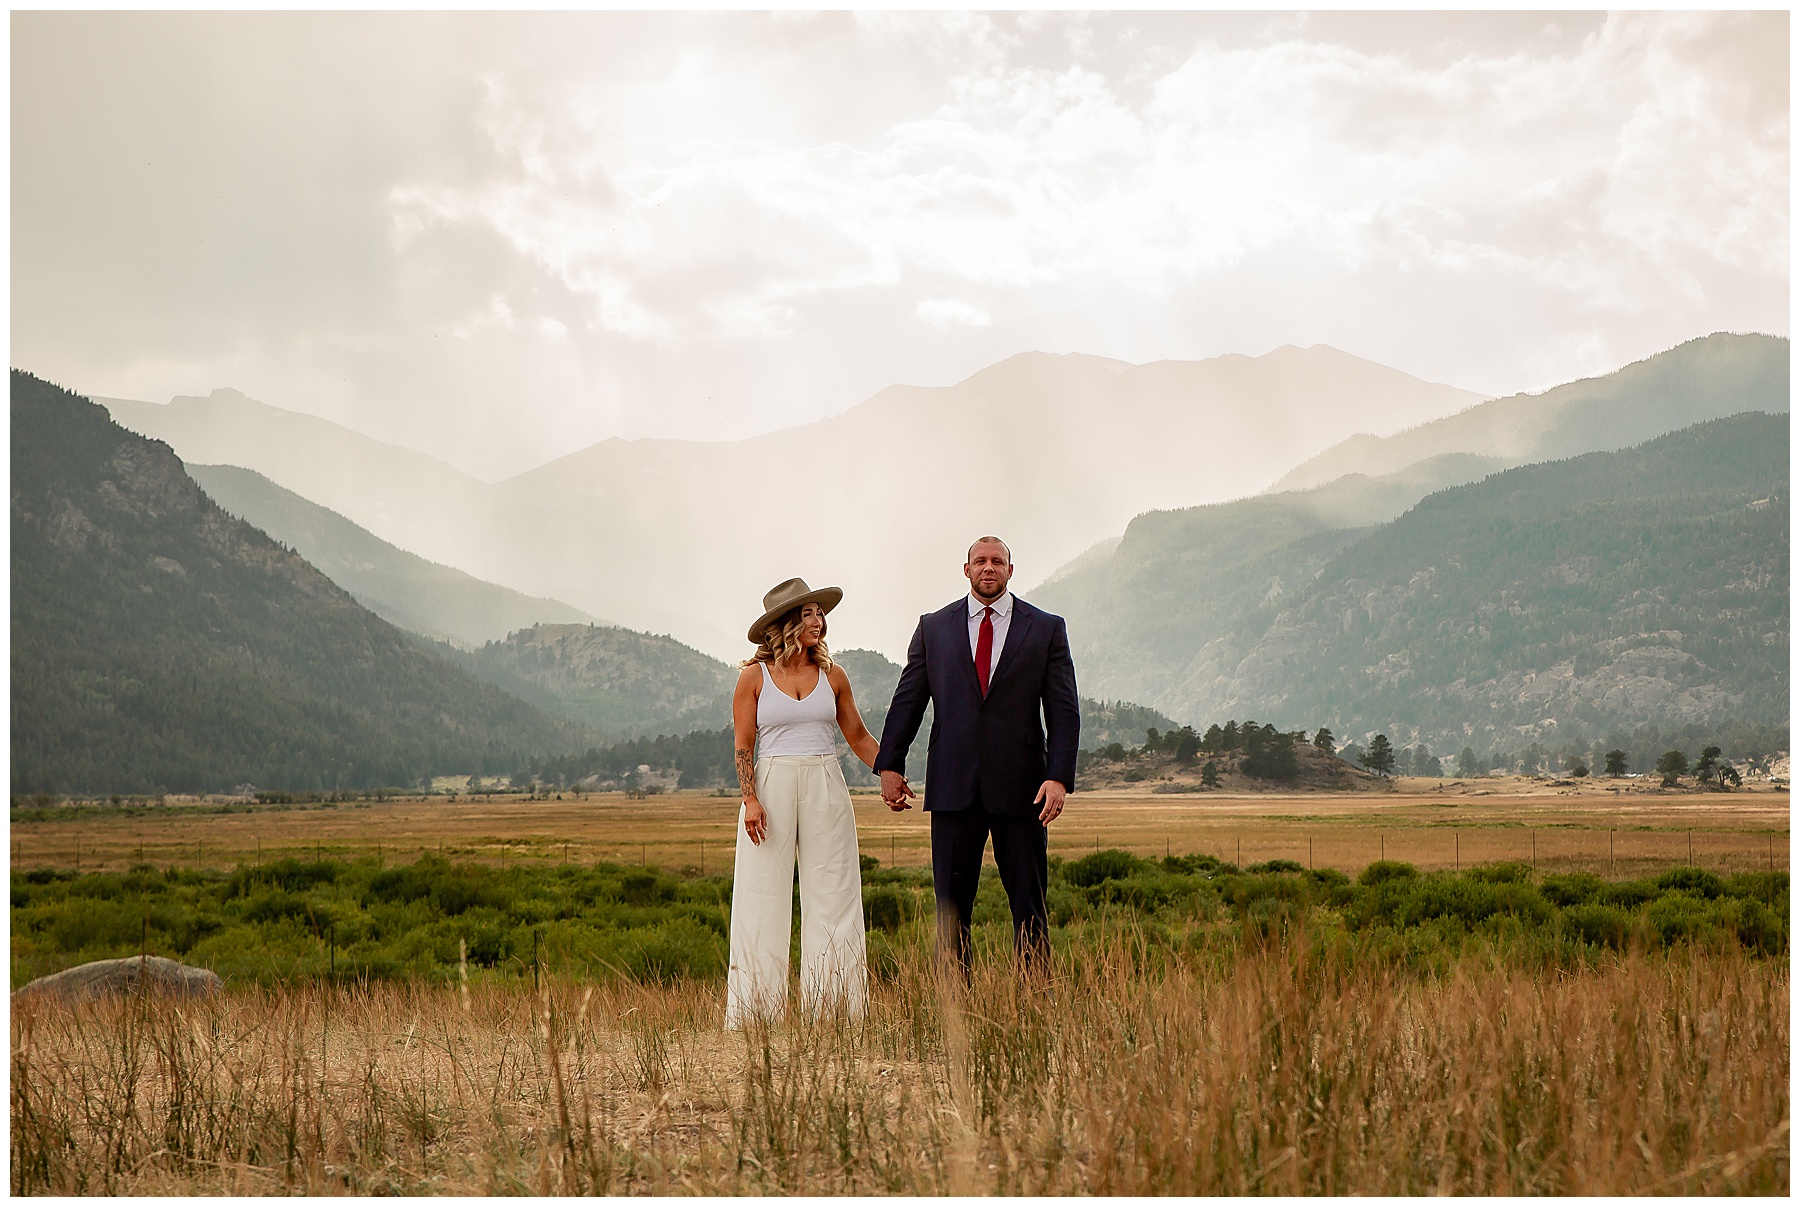 Bride and groom in a field on a partly cloudy day holding hands with the rocky mountains in the background